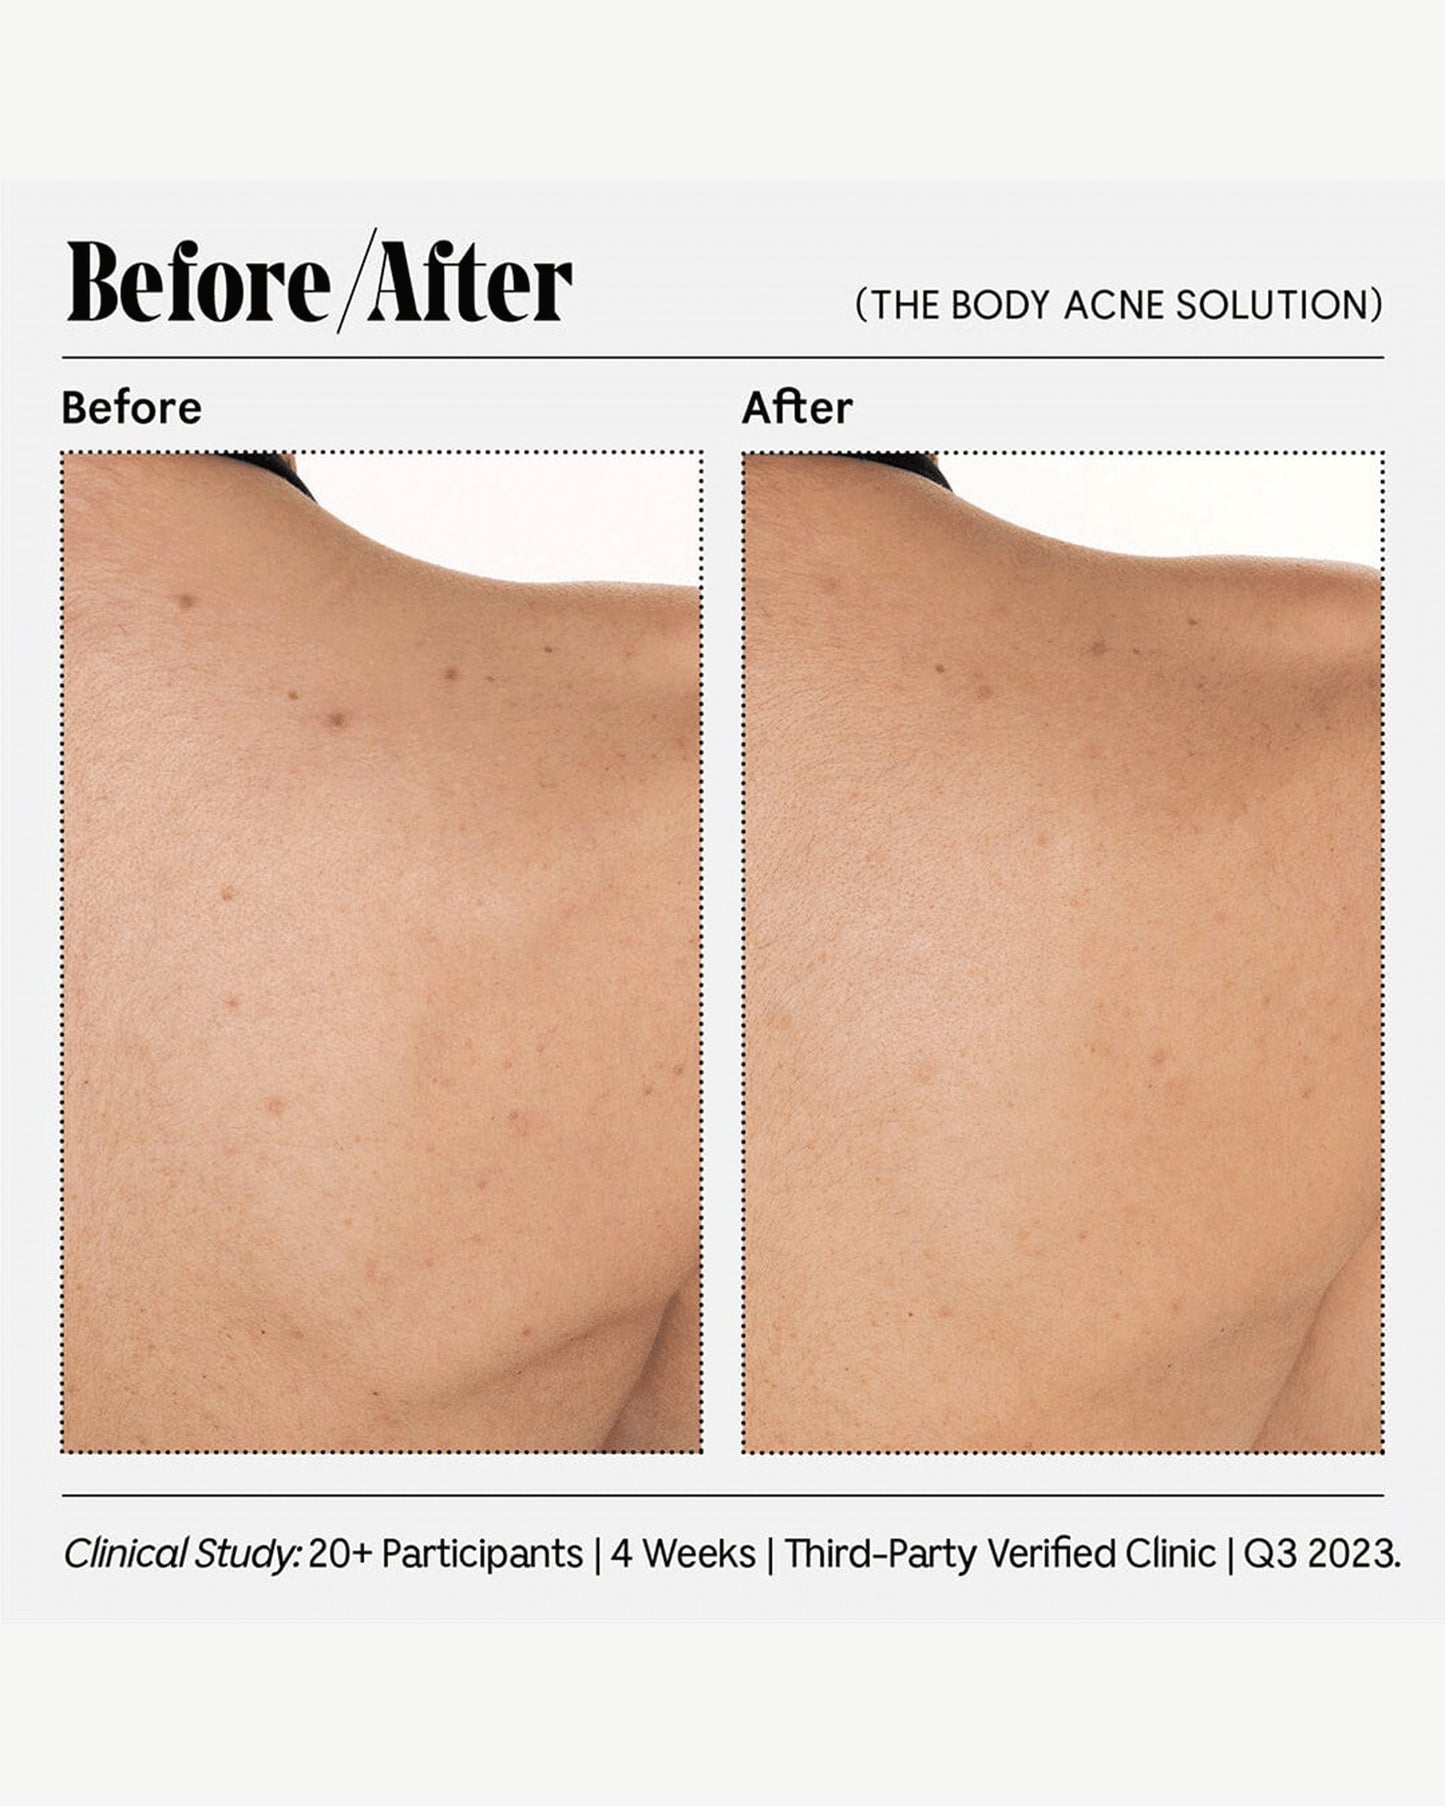 The Body Acne Solution